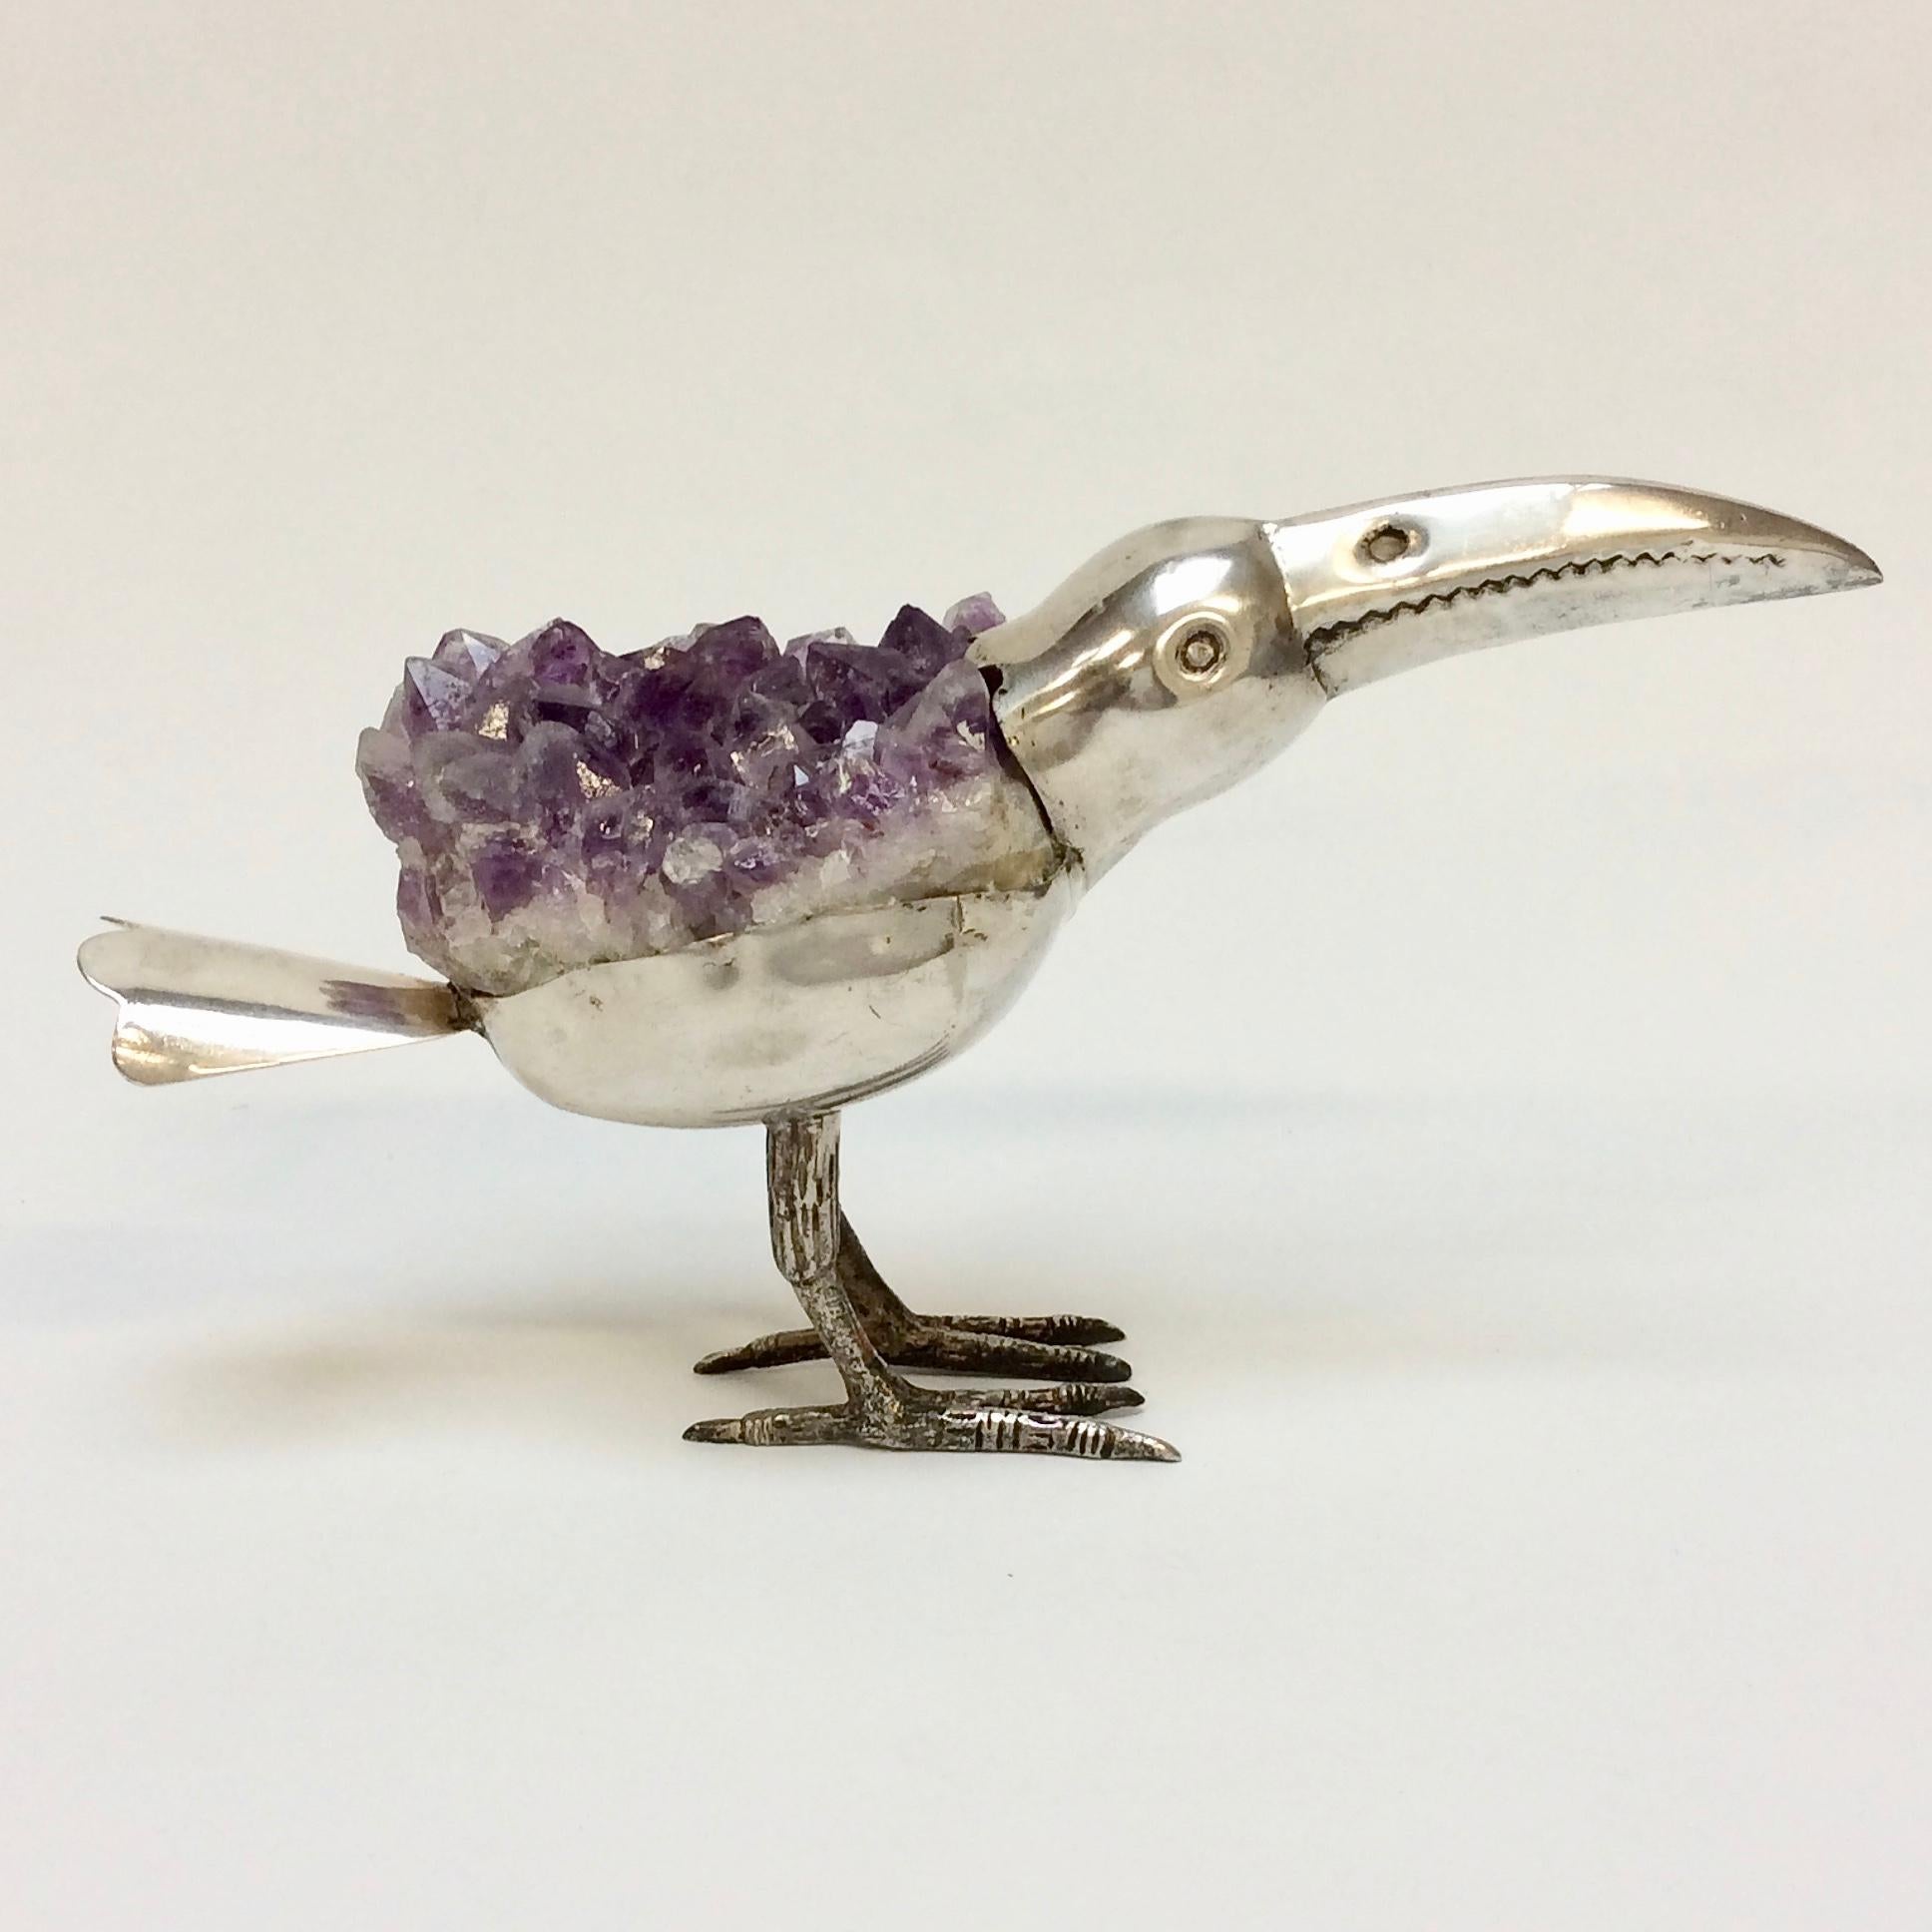 Nice decorative exotic bird.
Silver plated and amethyst, circa 1970, Brazil.
Stamped underneath Gerson BA P90.
Dimensions: 25 cm W, 12 cm H, 6 cm D.
All purchases are covered by our Buyer Protection Guarantee.
This item can be returned within 7 days